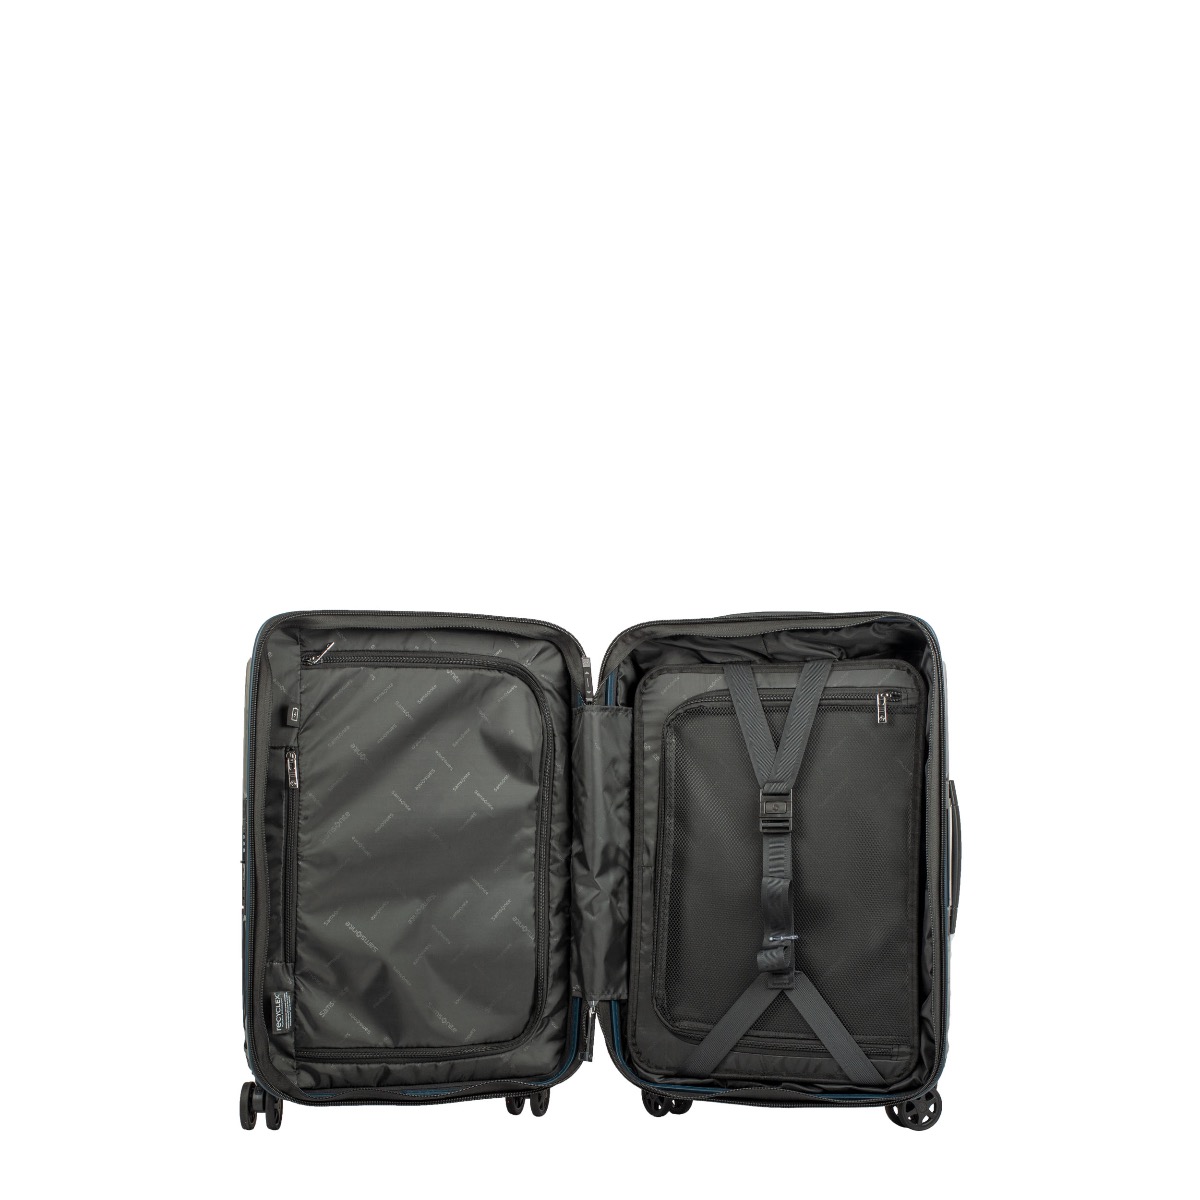 Valise cabine 55cm extensible - Nuon